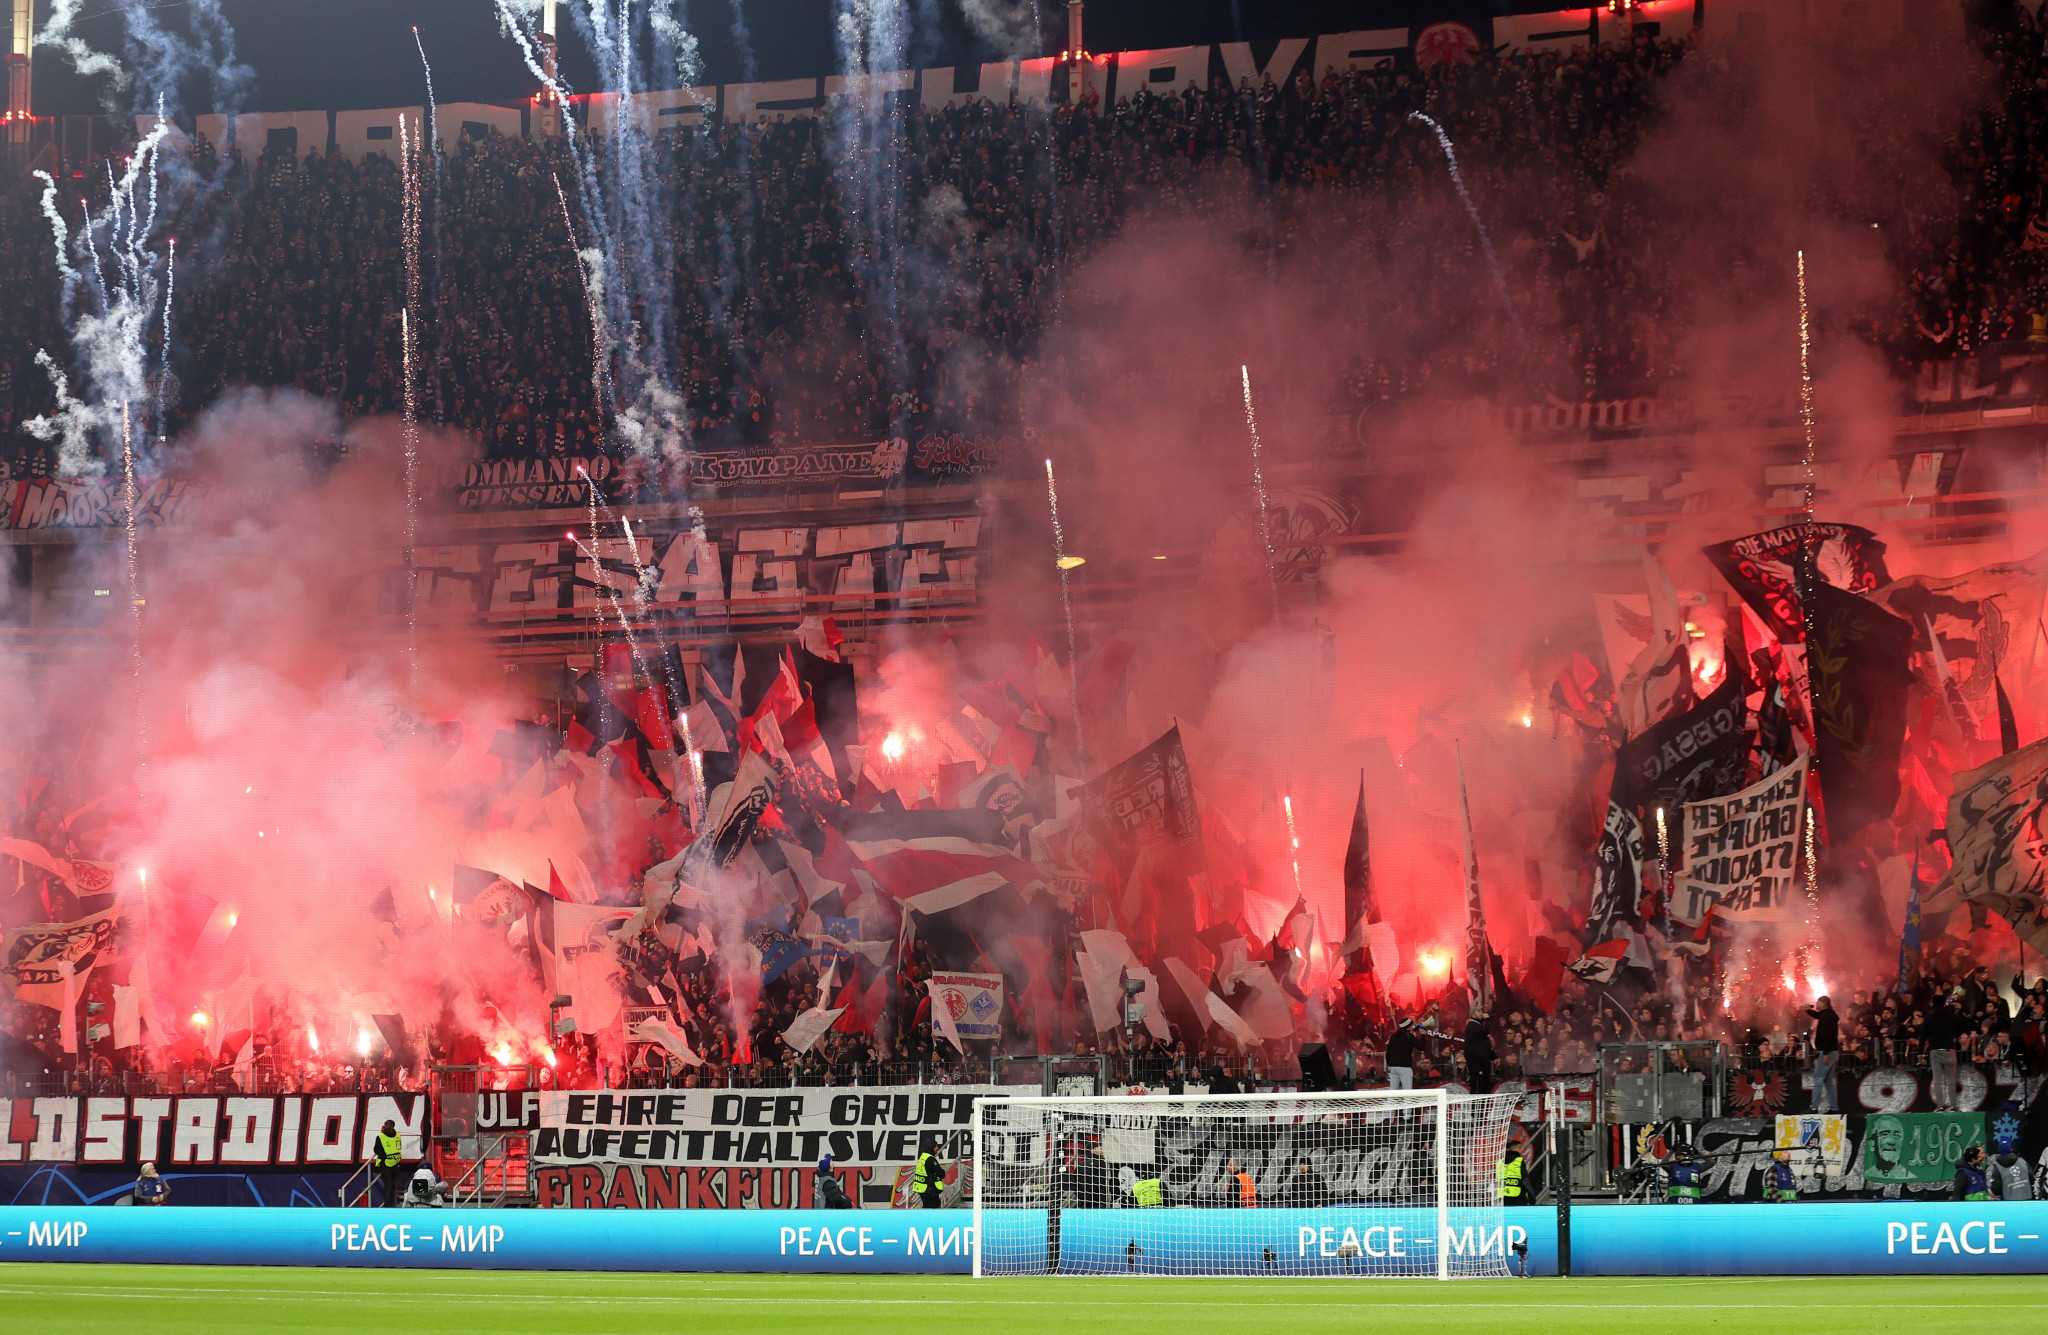 Eintracht Frankfurt fans have been banned from buying tickets to the Champions League match against Napoli ©Getty Images